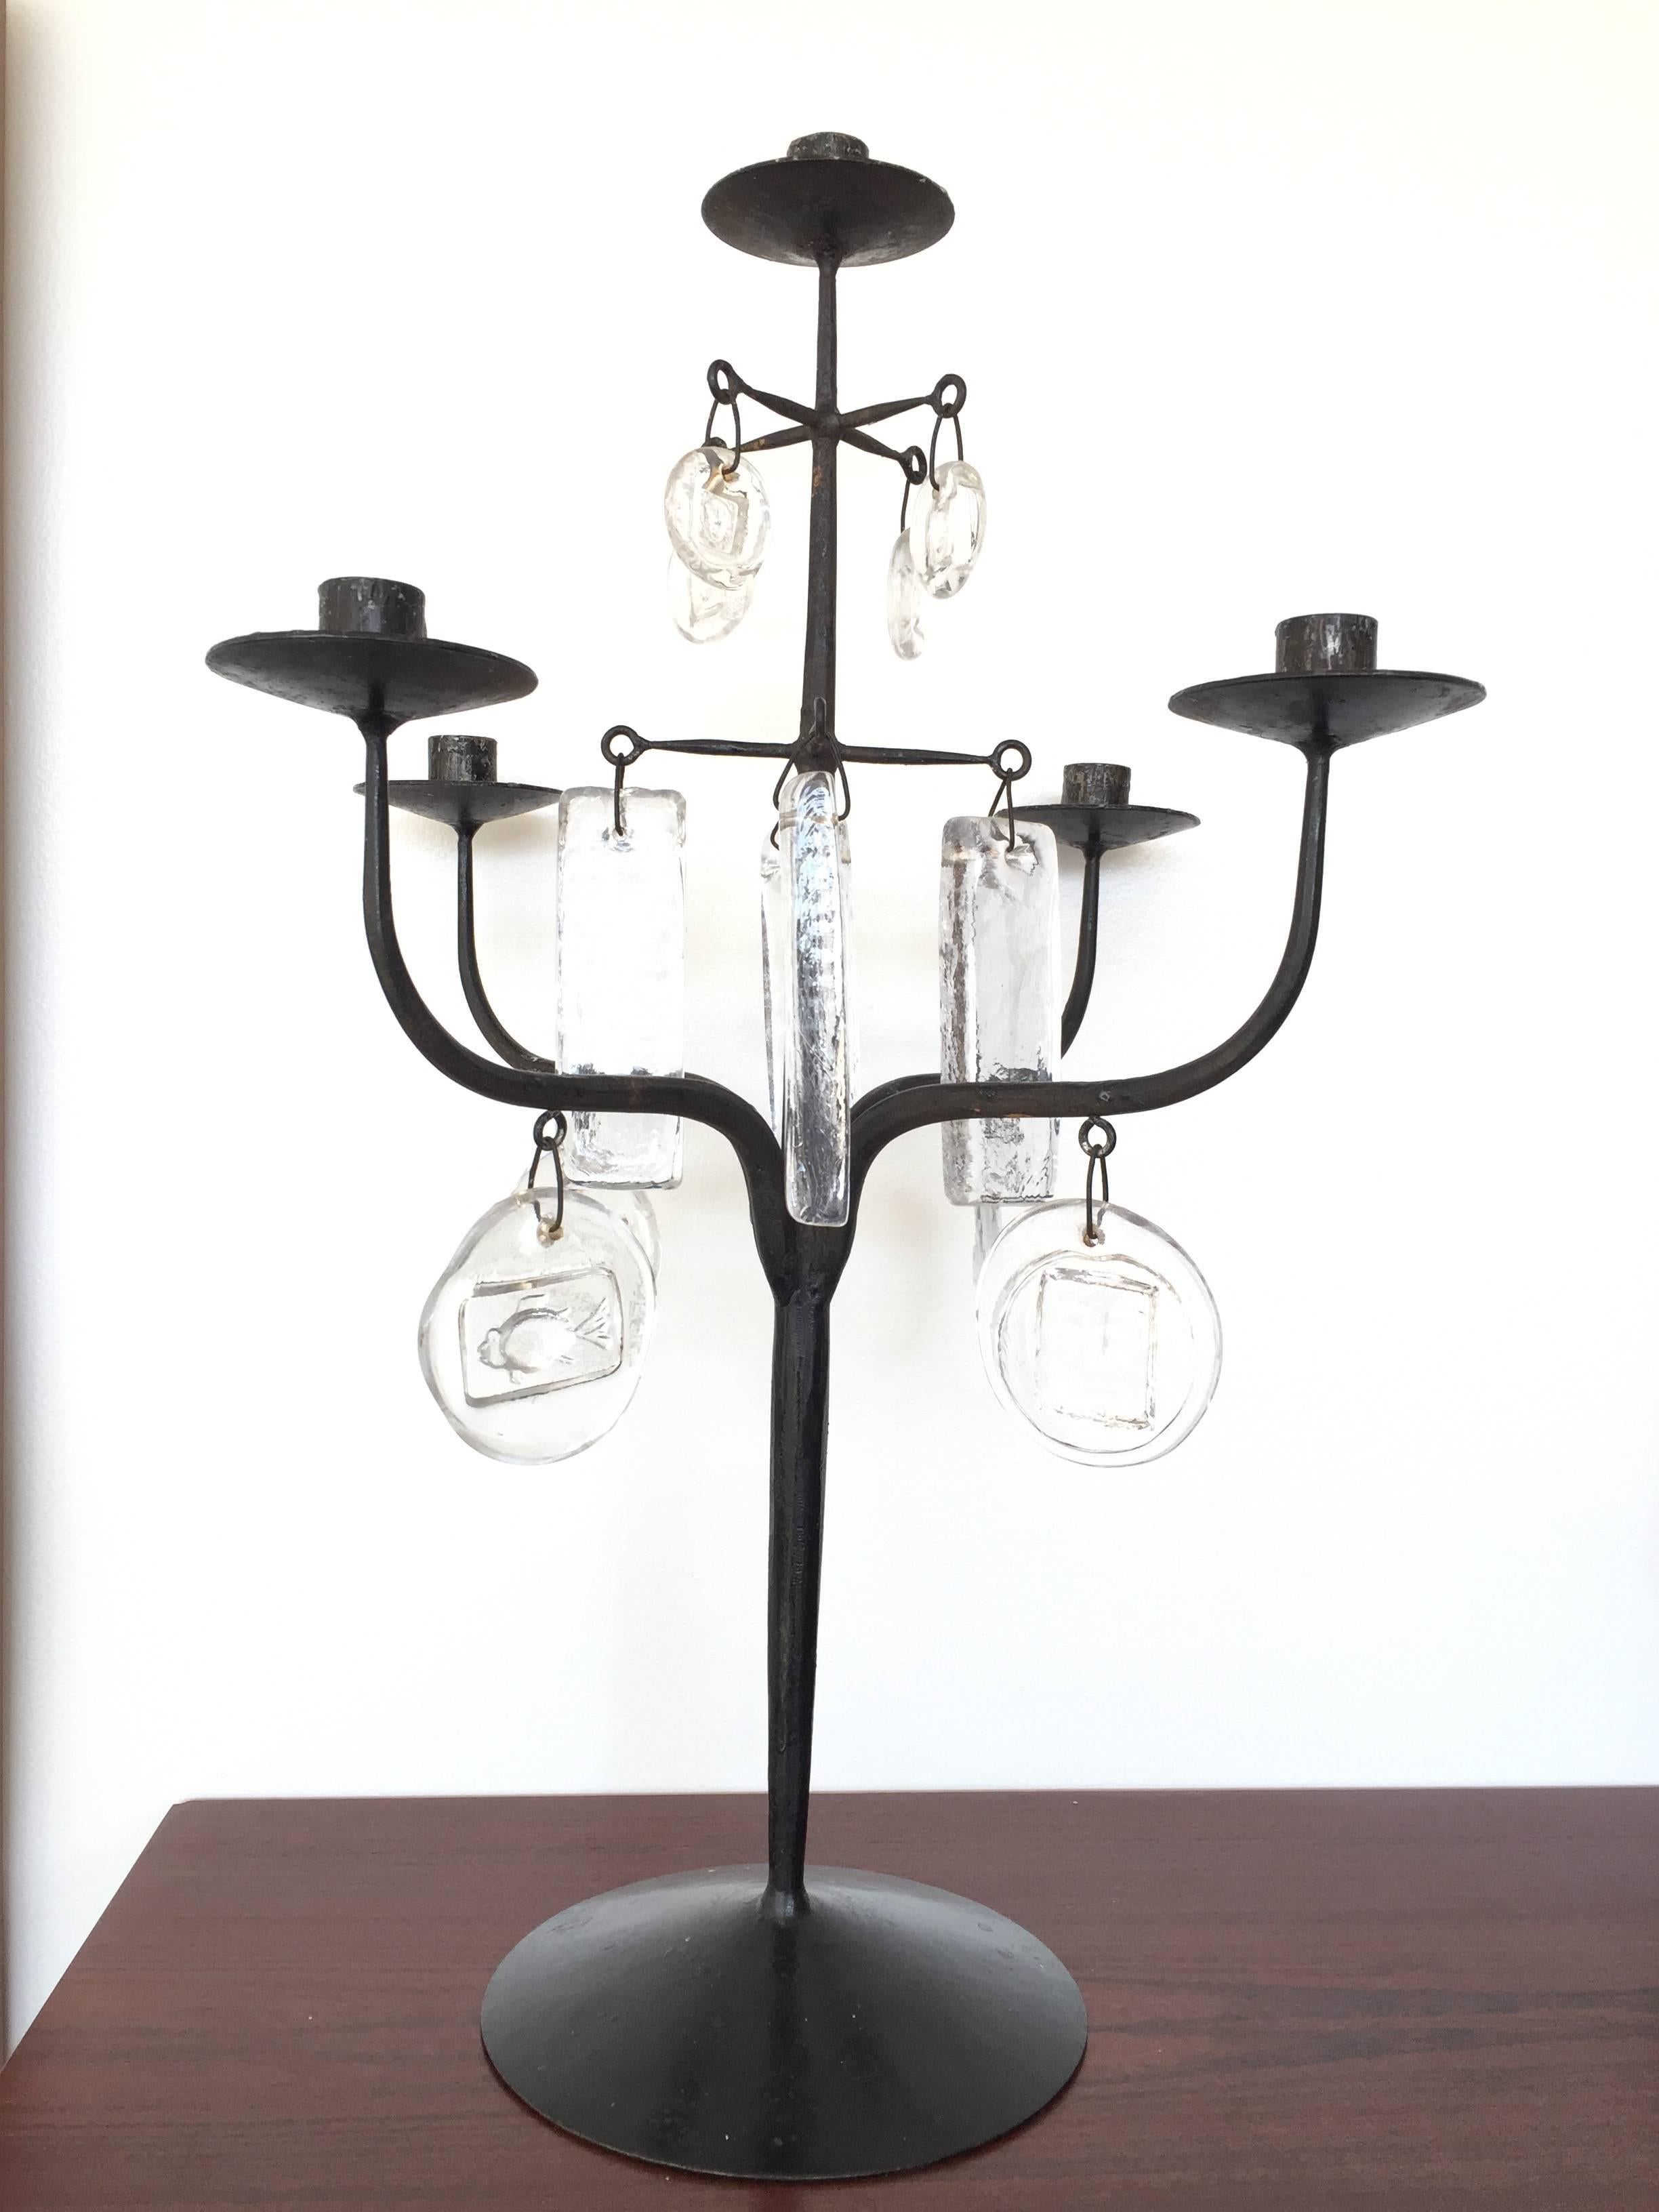 Very tall and heavy black iron candelabra candleholder by Erik Ho¨glund with various clear glass discs with impressed images, Designed in 1957 for Boda Glassworks. Ironwork by Axel Stro¨mberg.